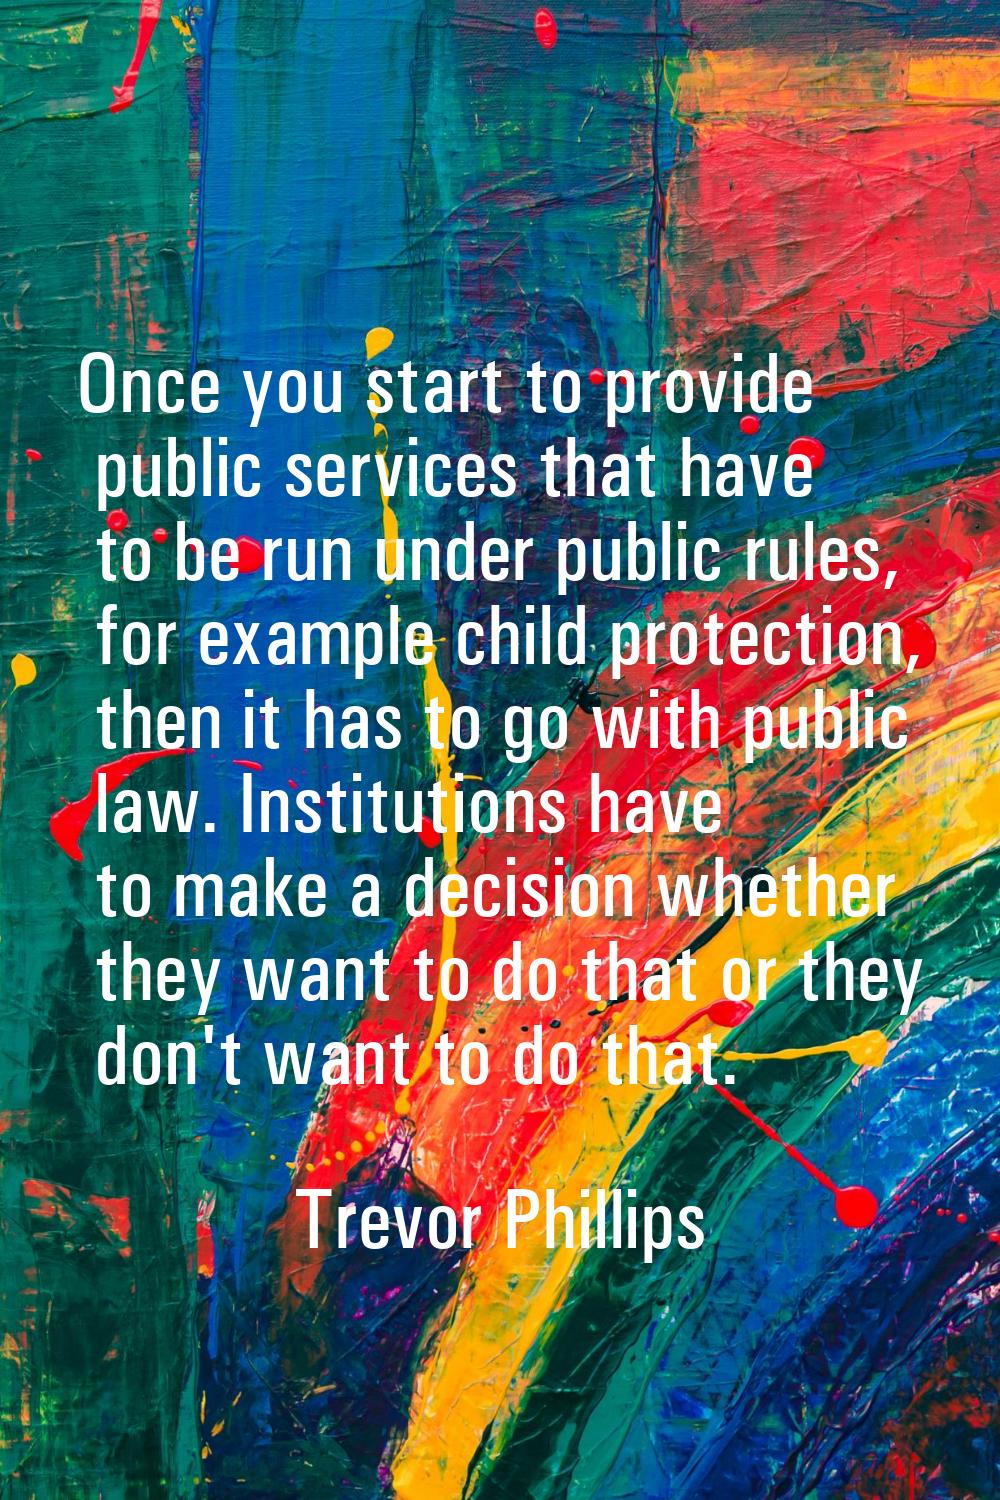 Once you start to provide public services that have to be run under public rules, for example child